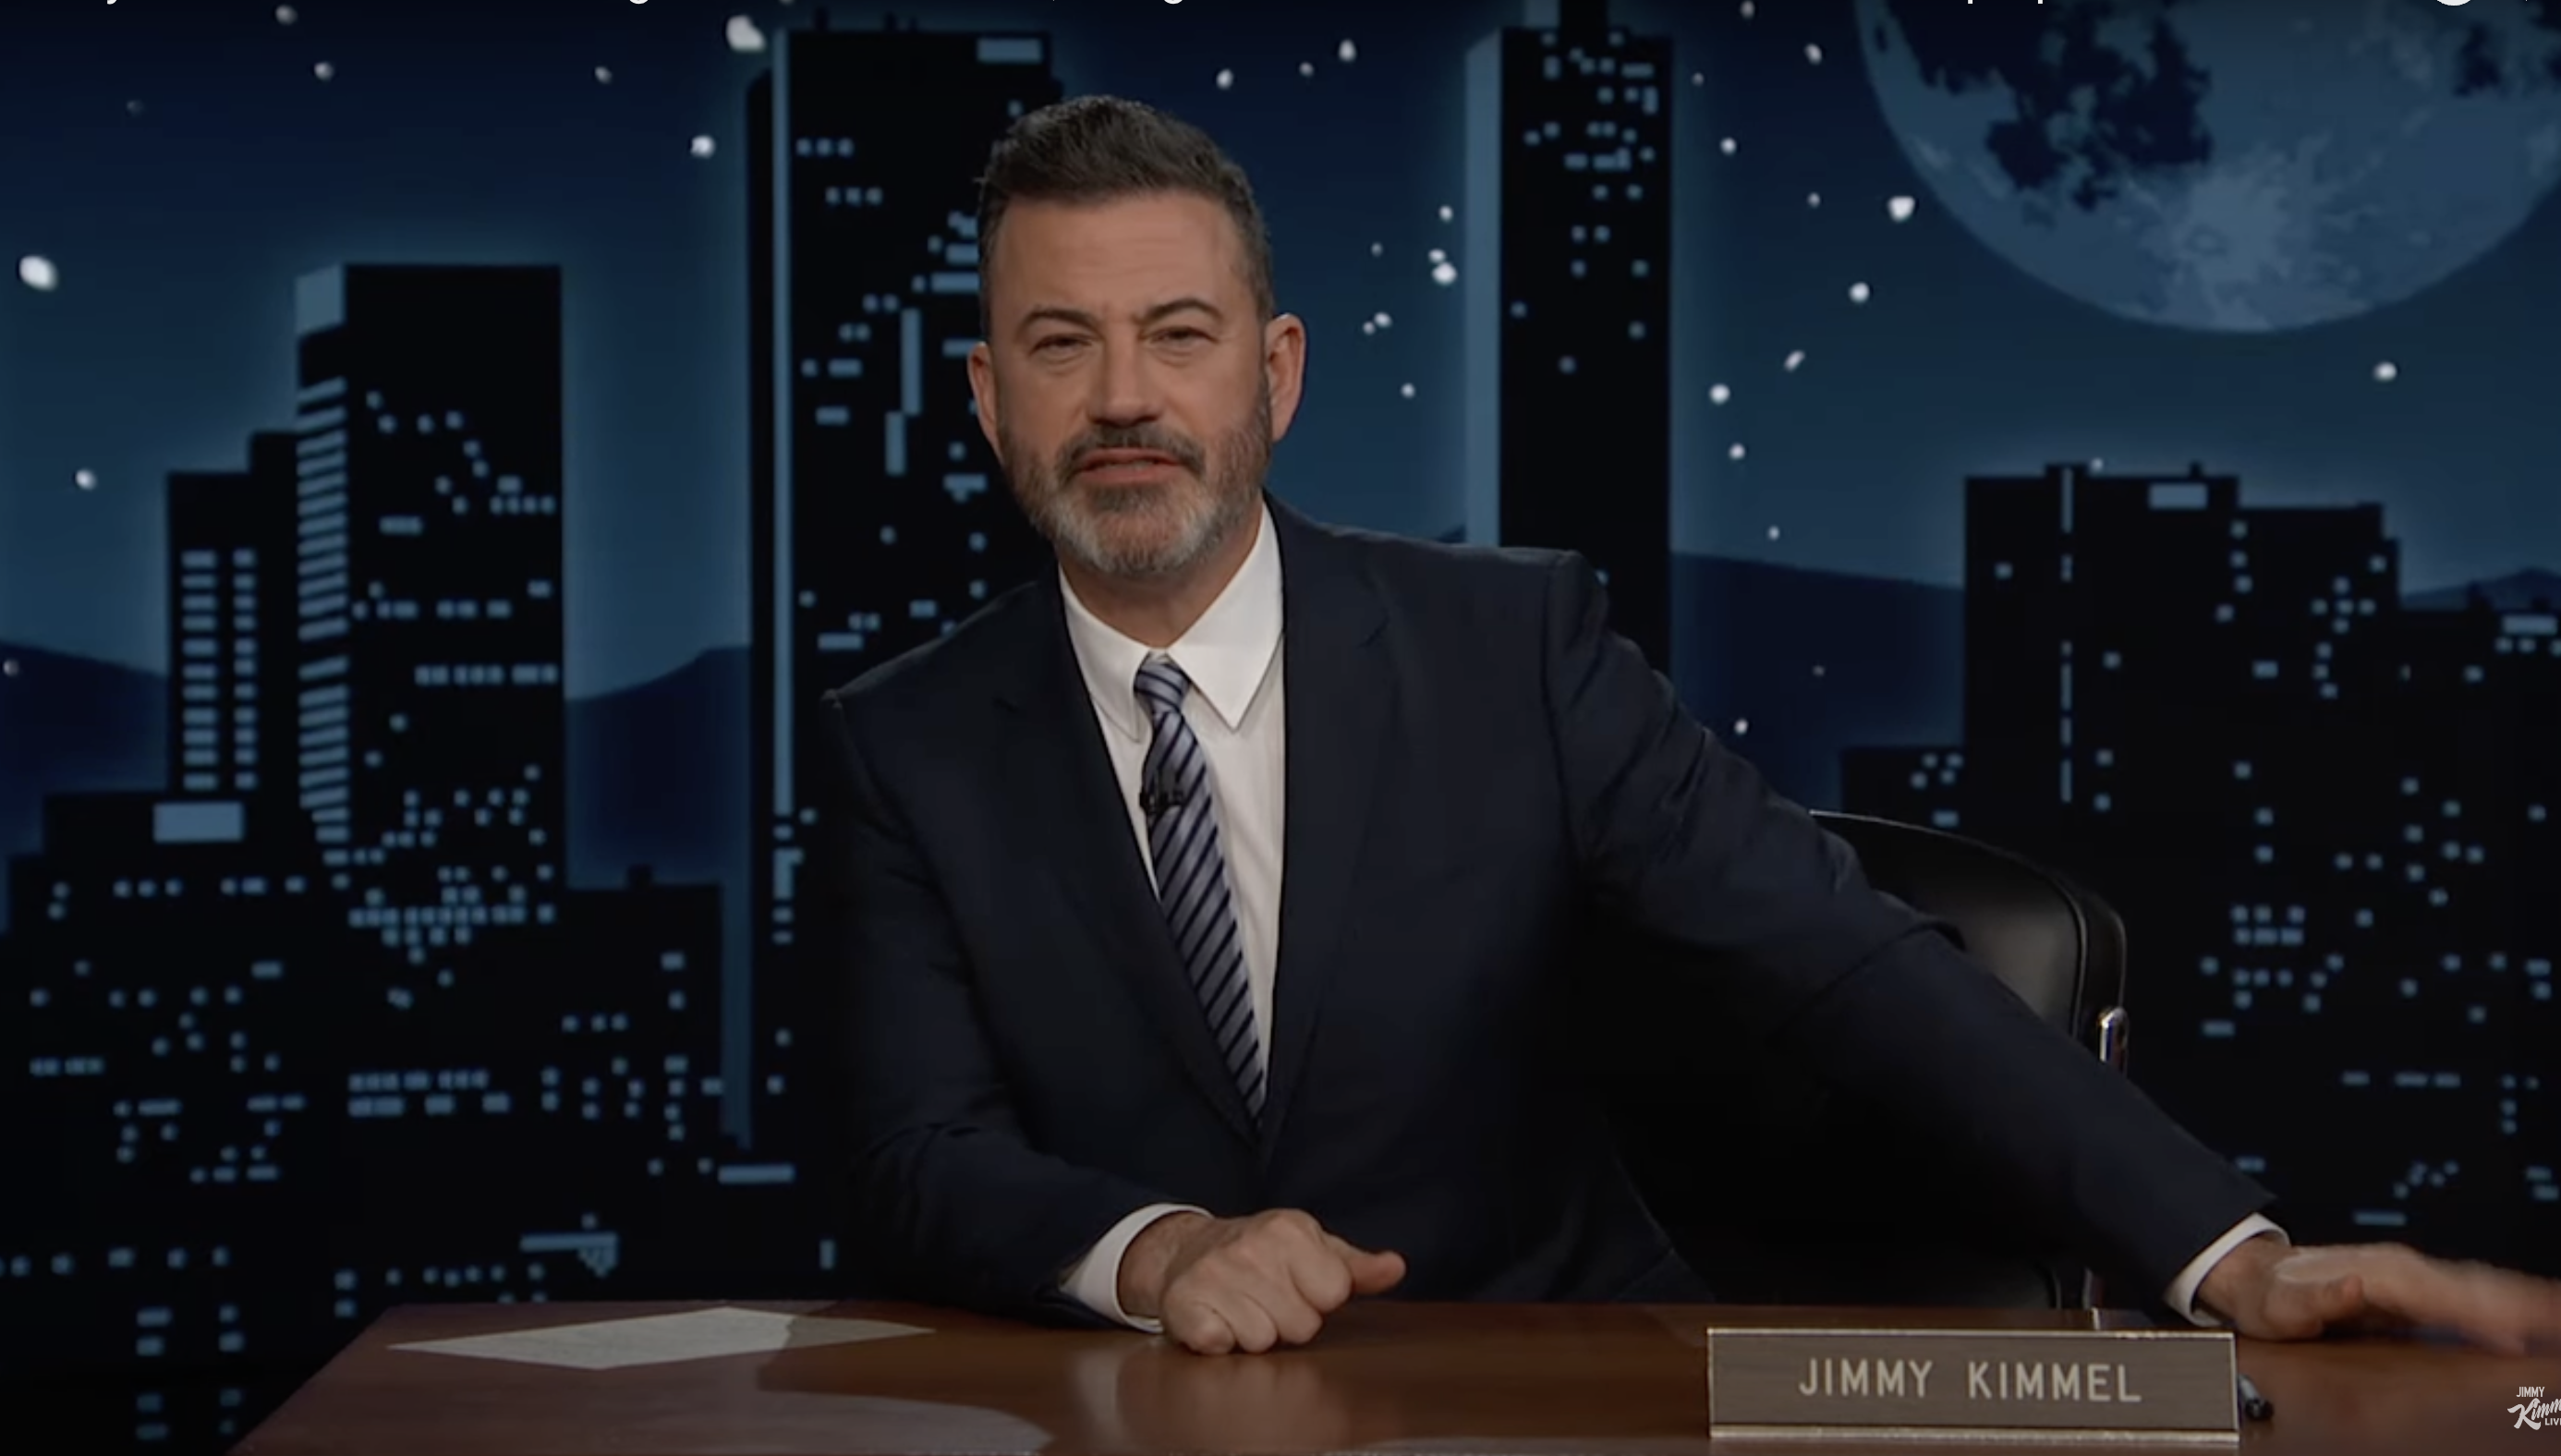 Jimmy Kimmel Could Be About to Disappear From TV For Good